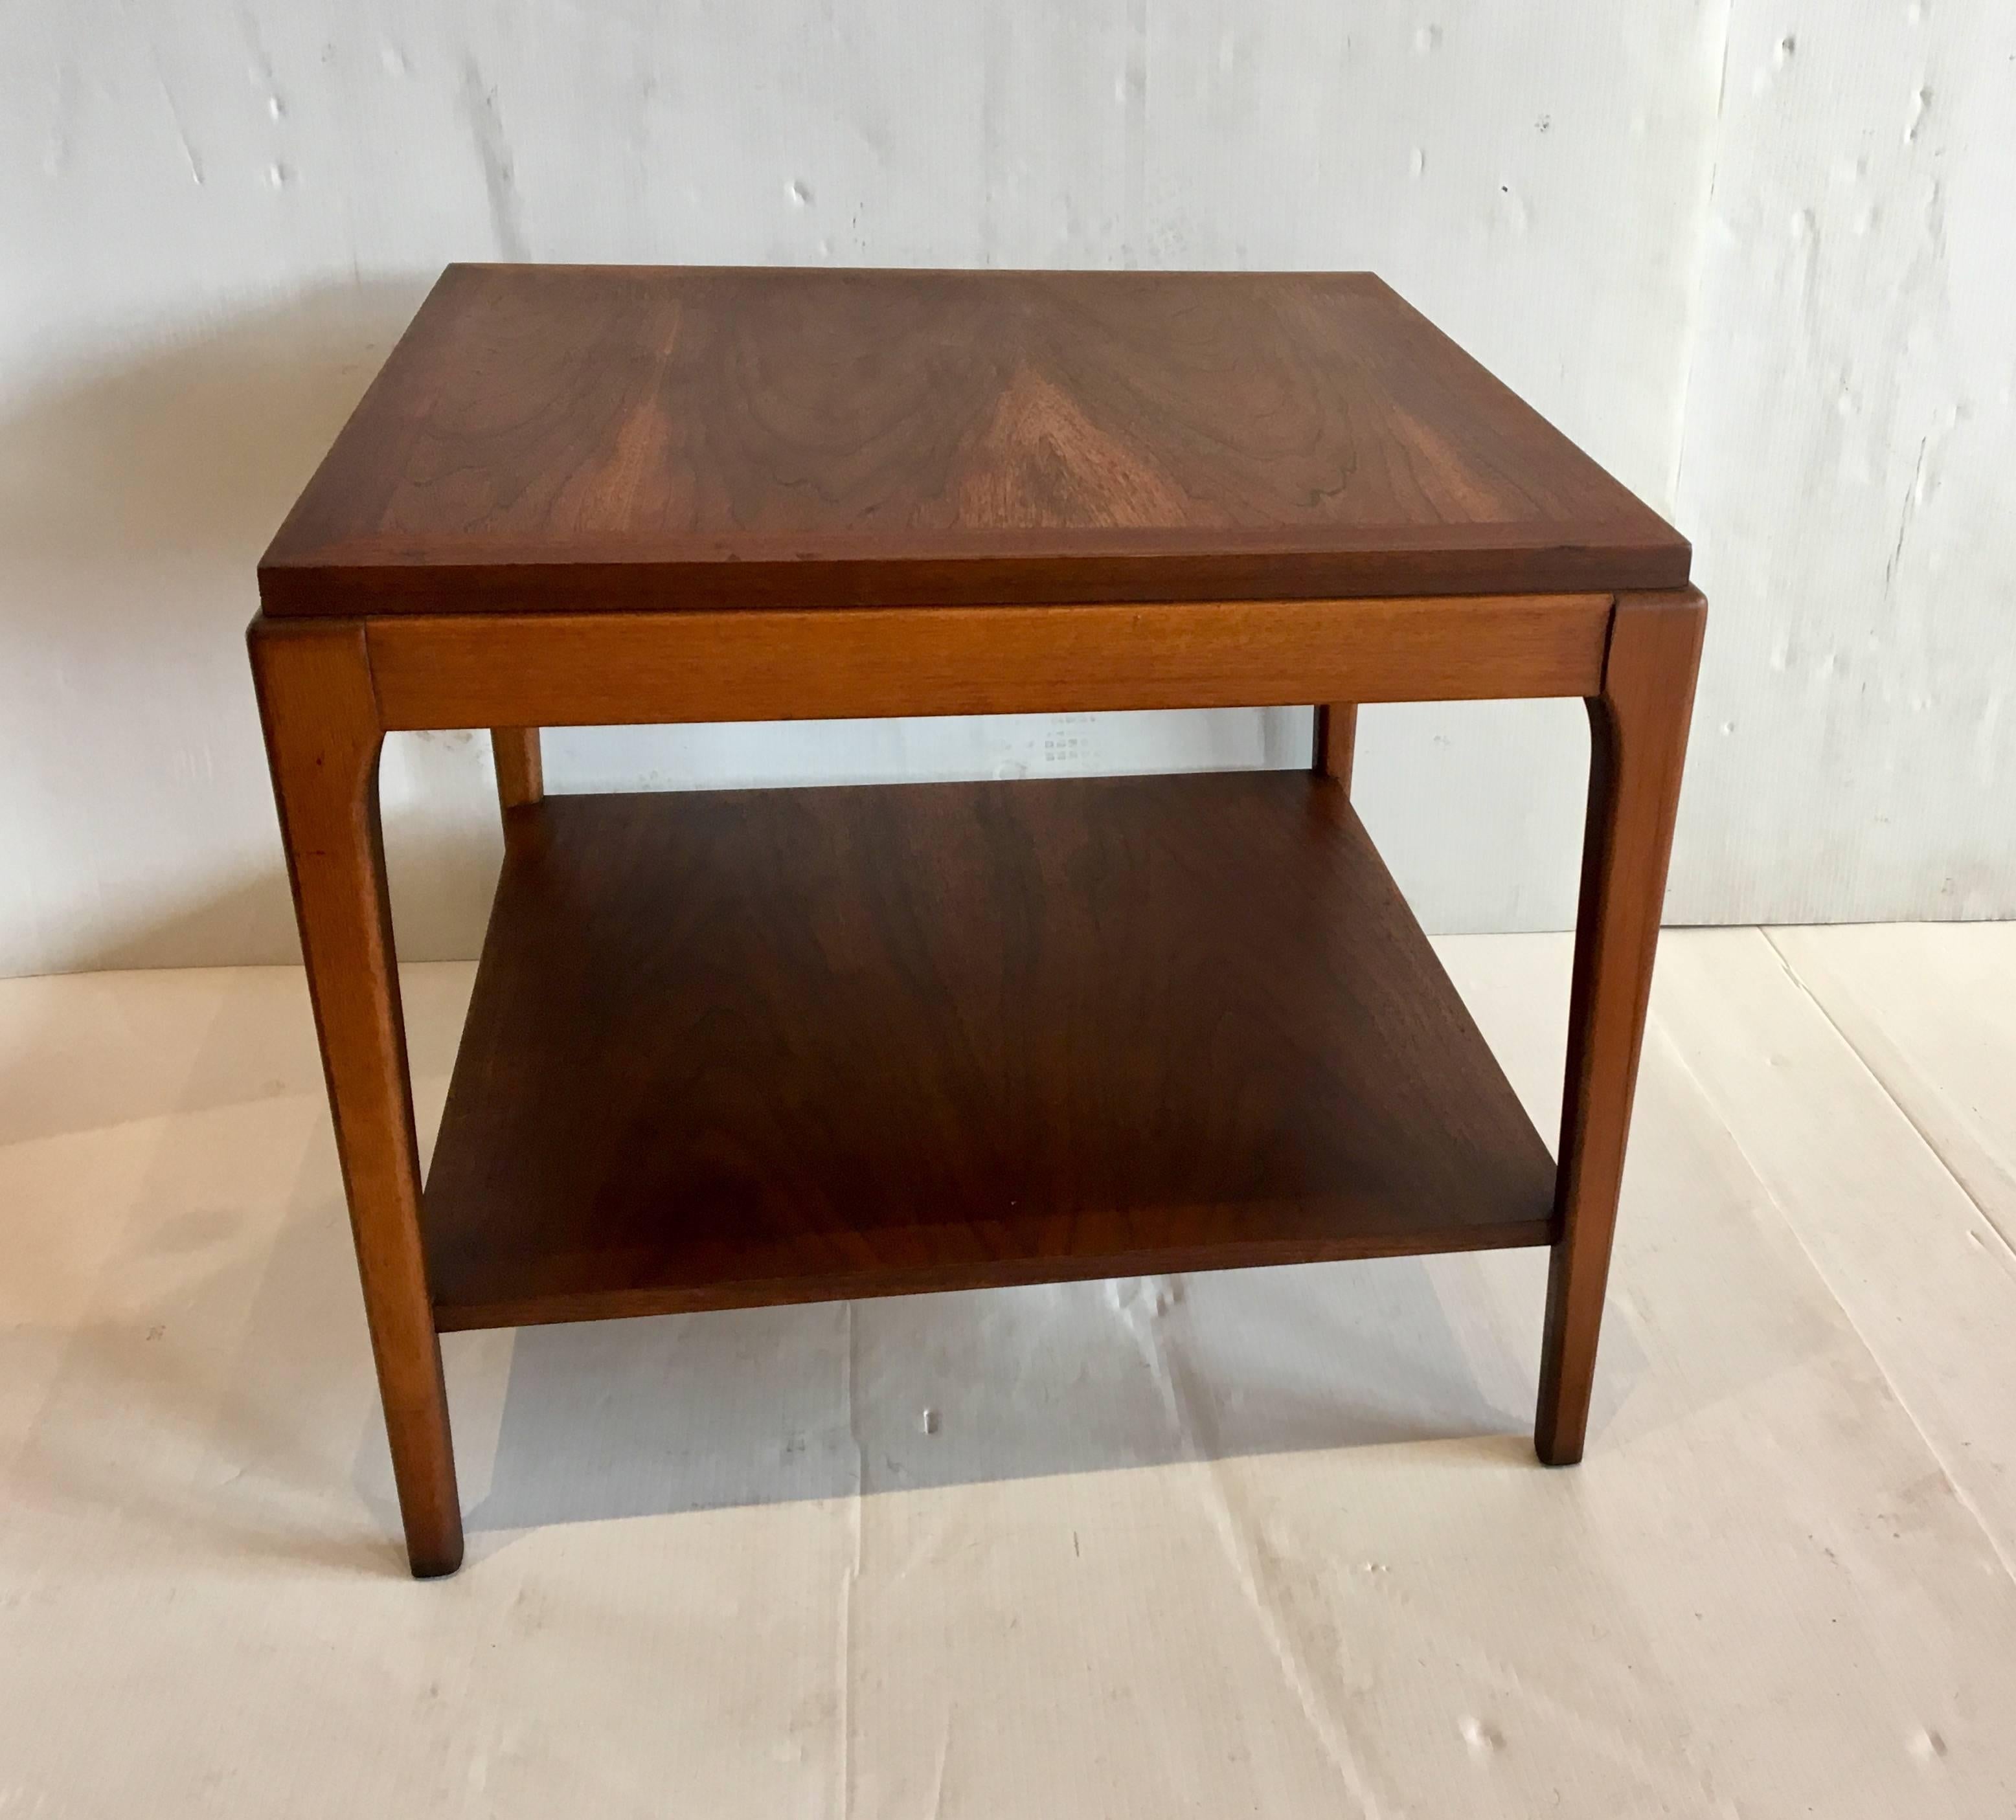 20th Century American Mid-Century Modern Walnut Square Cocktail or End Table